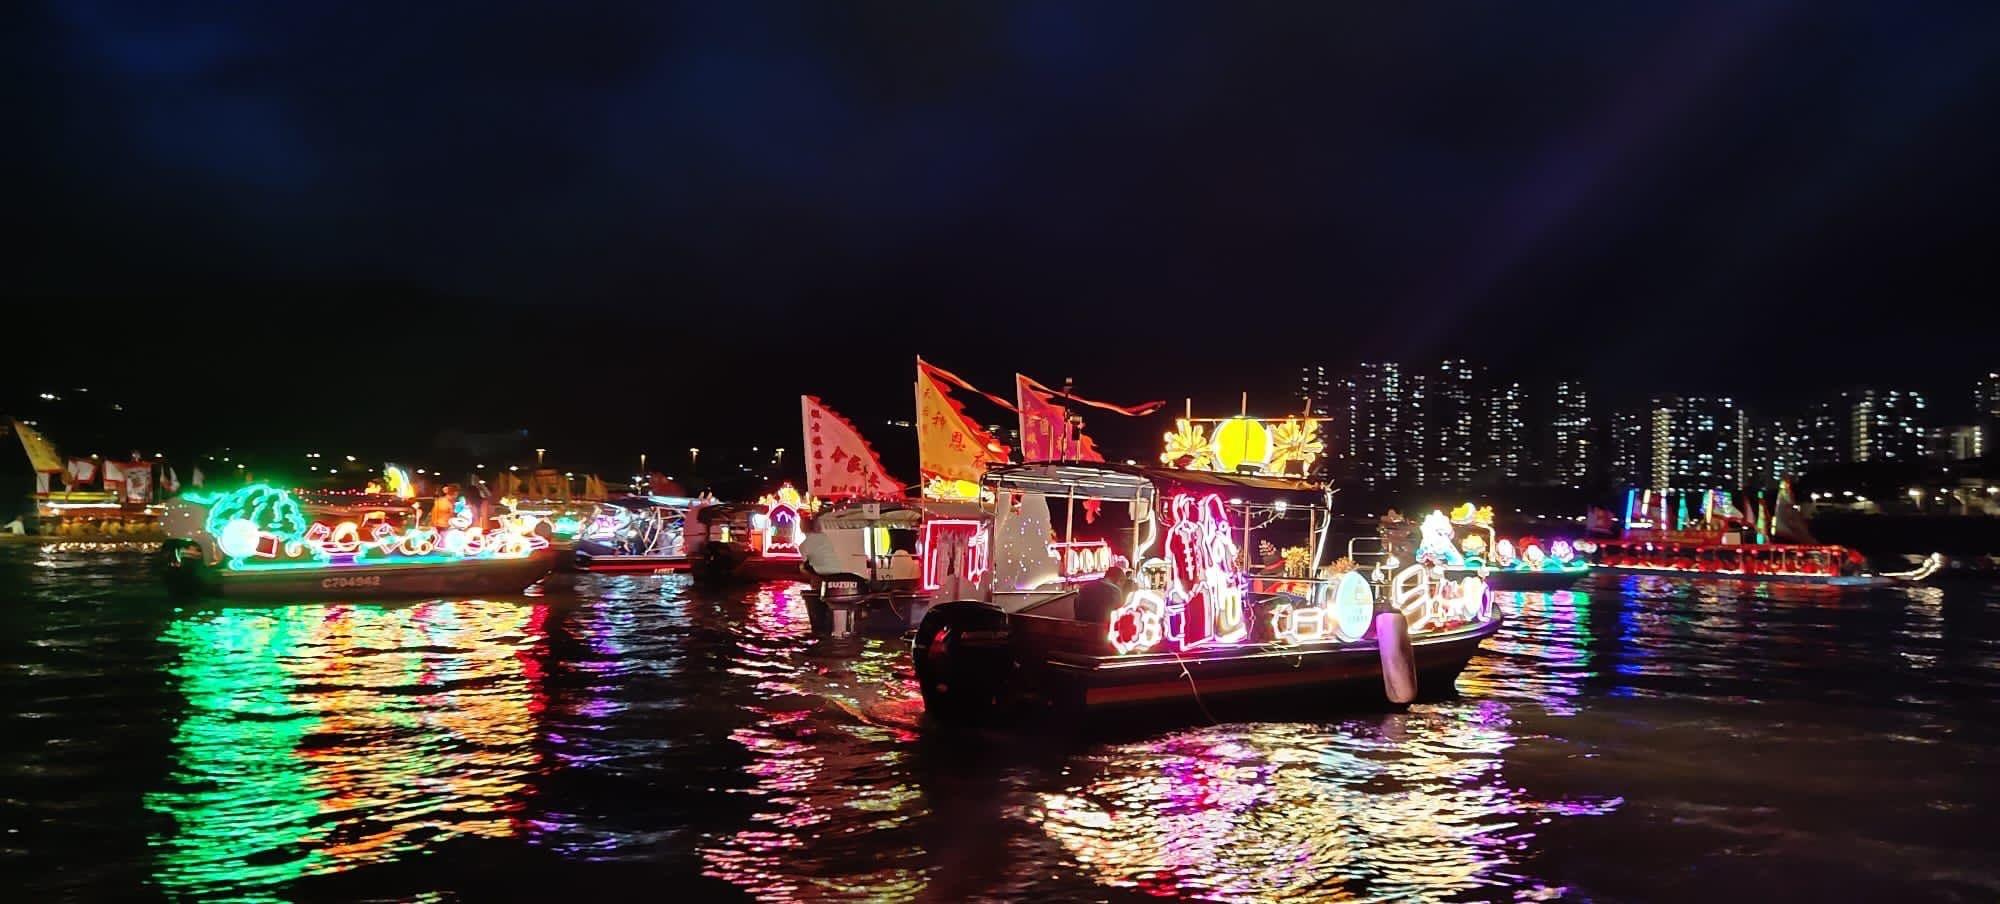 The Tai Po District Office and the Tai Po District Preparatory Committee for Activities to Celebrate the 25th Anniversary of the Establishment of the Hong Kong Special Administrative Region yesterday (July 3) organised a parade with the elements of sea, land and sky at the Tai Po Waterfront Park. Photo shows boats with Tai Po themed lighting decorations having sea parade off the Tolo Harbour.